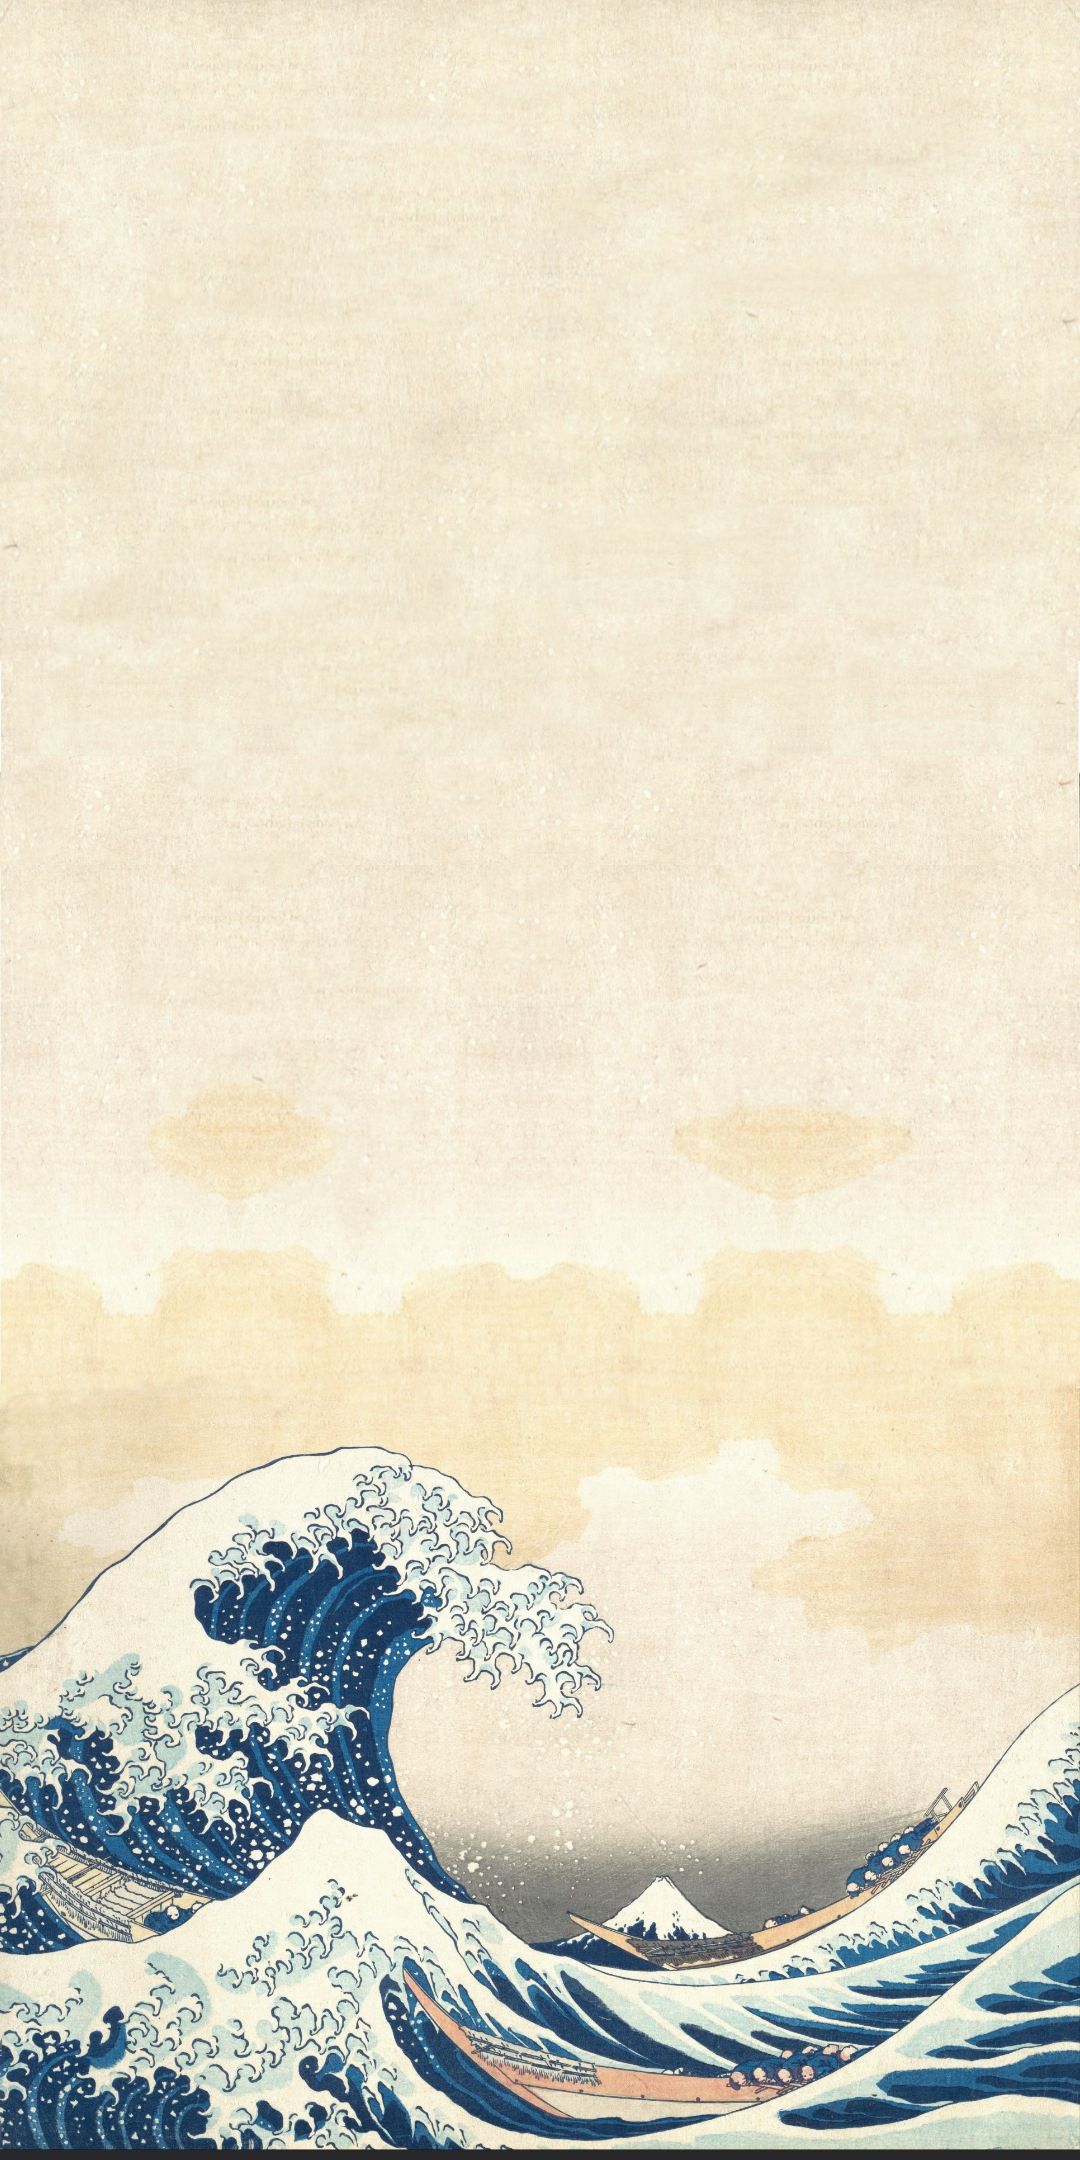 IPhone wallpaper with a picture of a wave - Wave